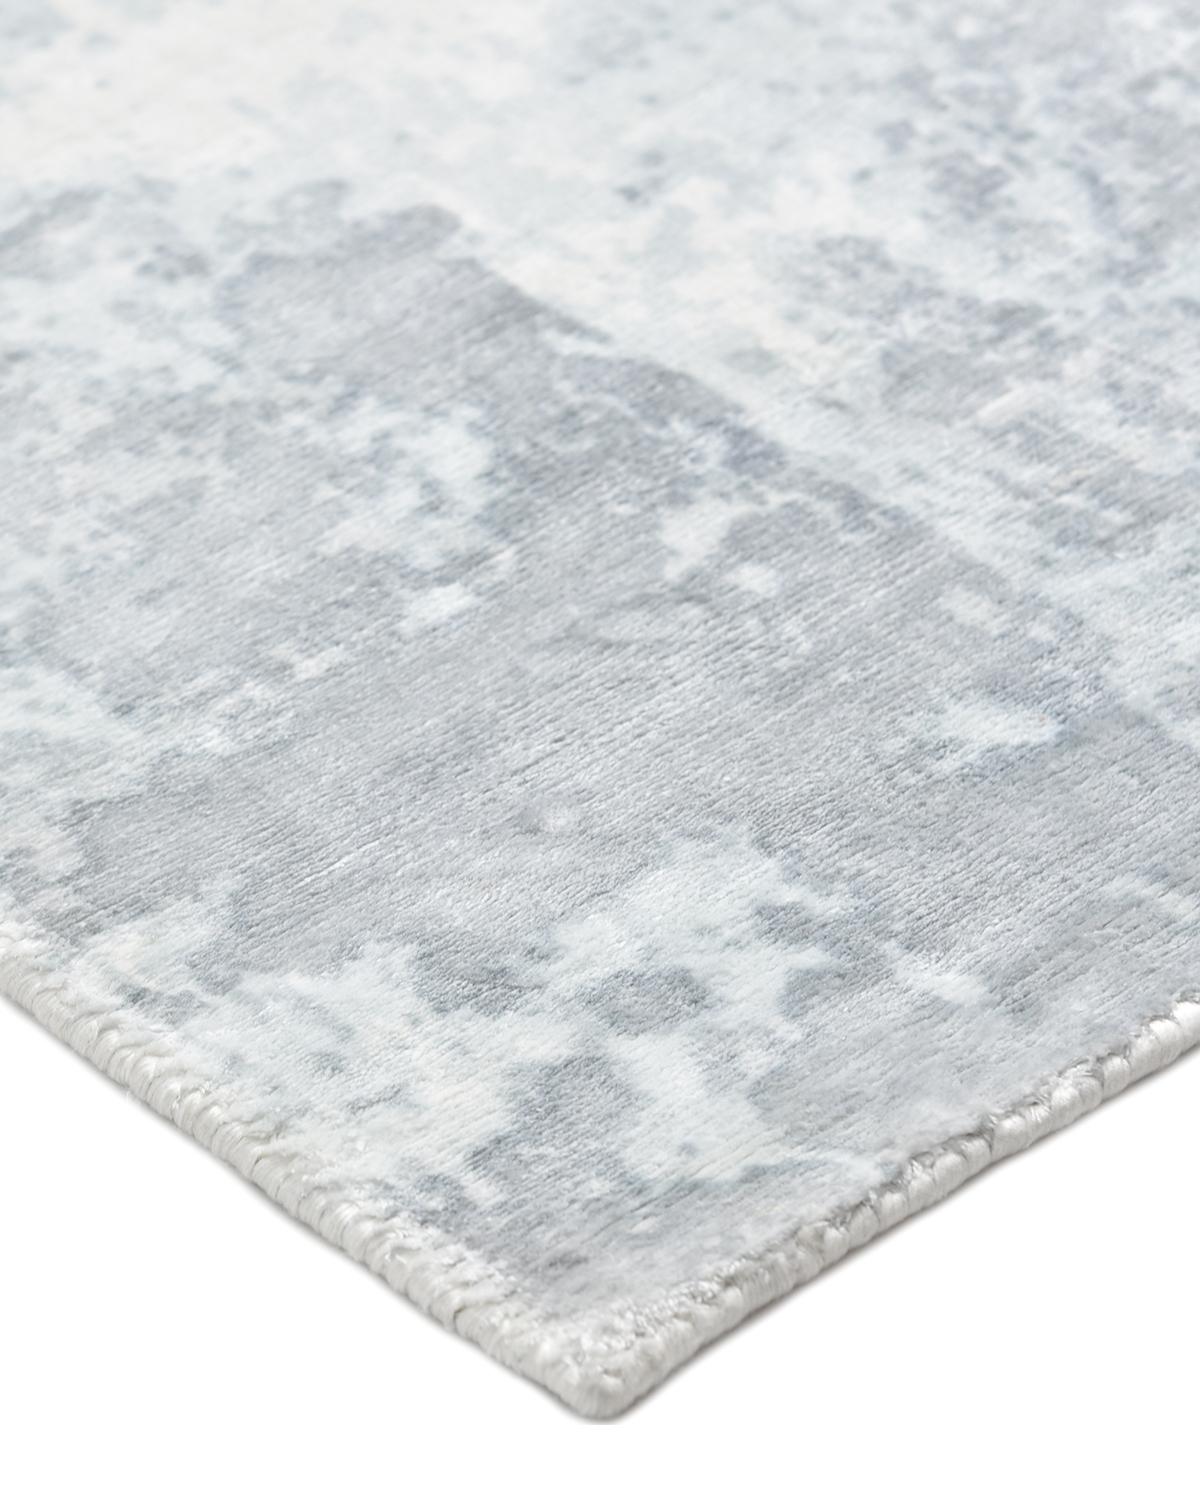 With their freeform motifs and sophisticated color play, the rugs in the Abstract collection imbue a room with a fresh, dynamic spirit. This collection was handcrafted, in India, using the finest-quality fibers and methods passed down for